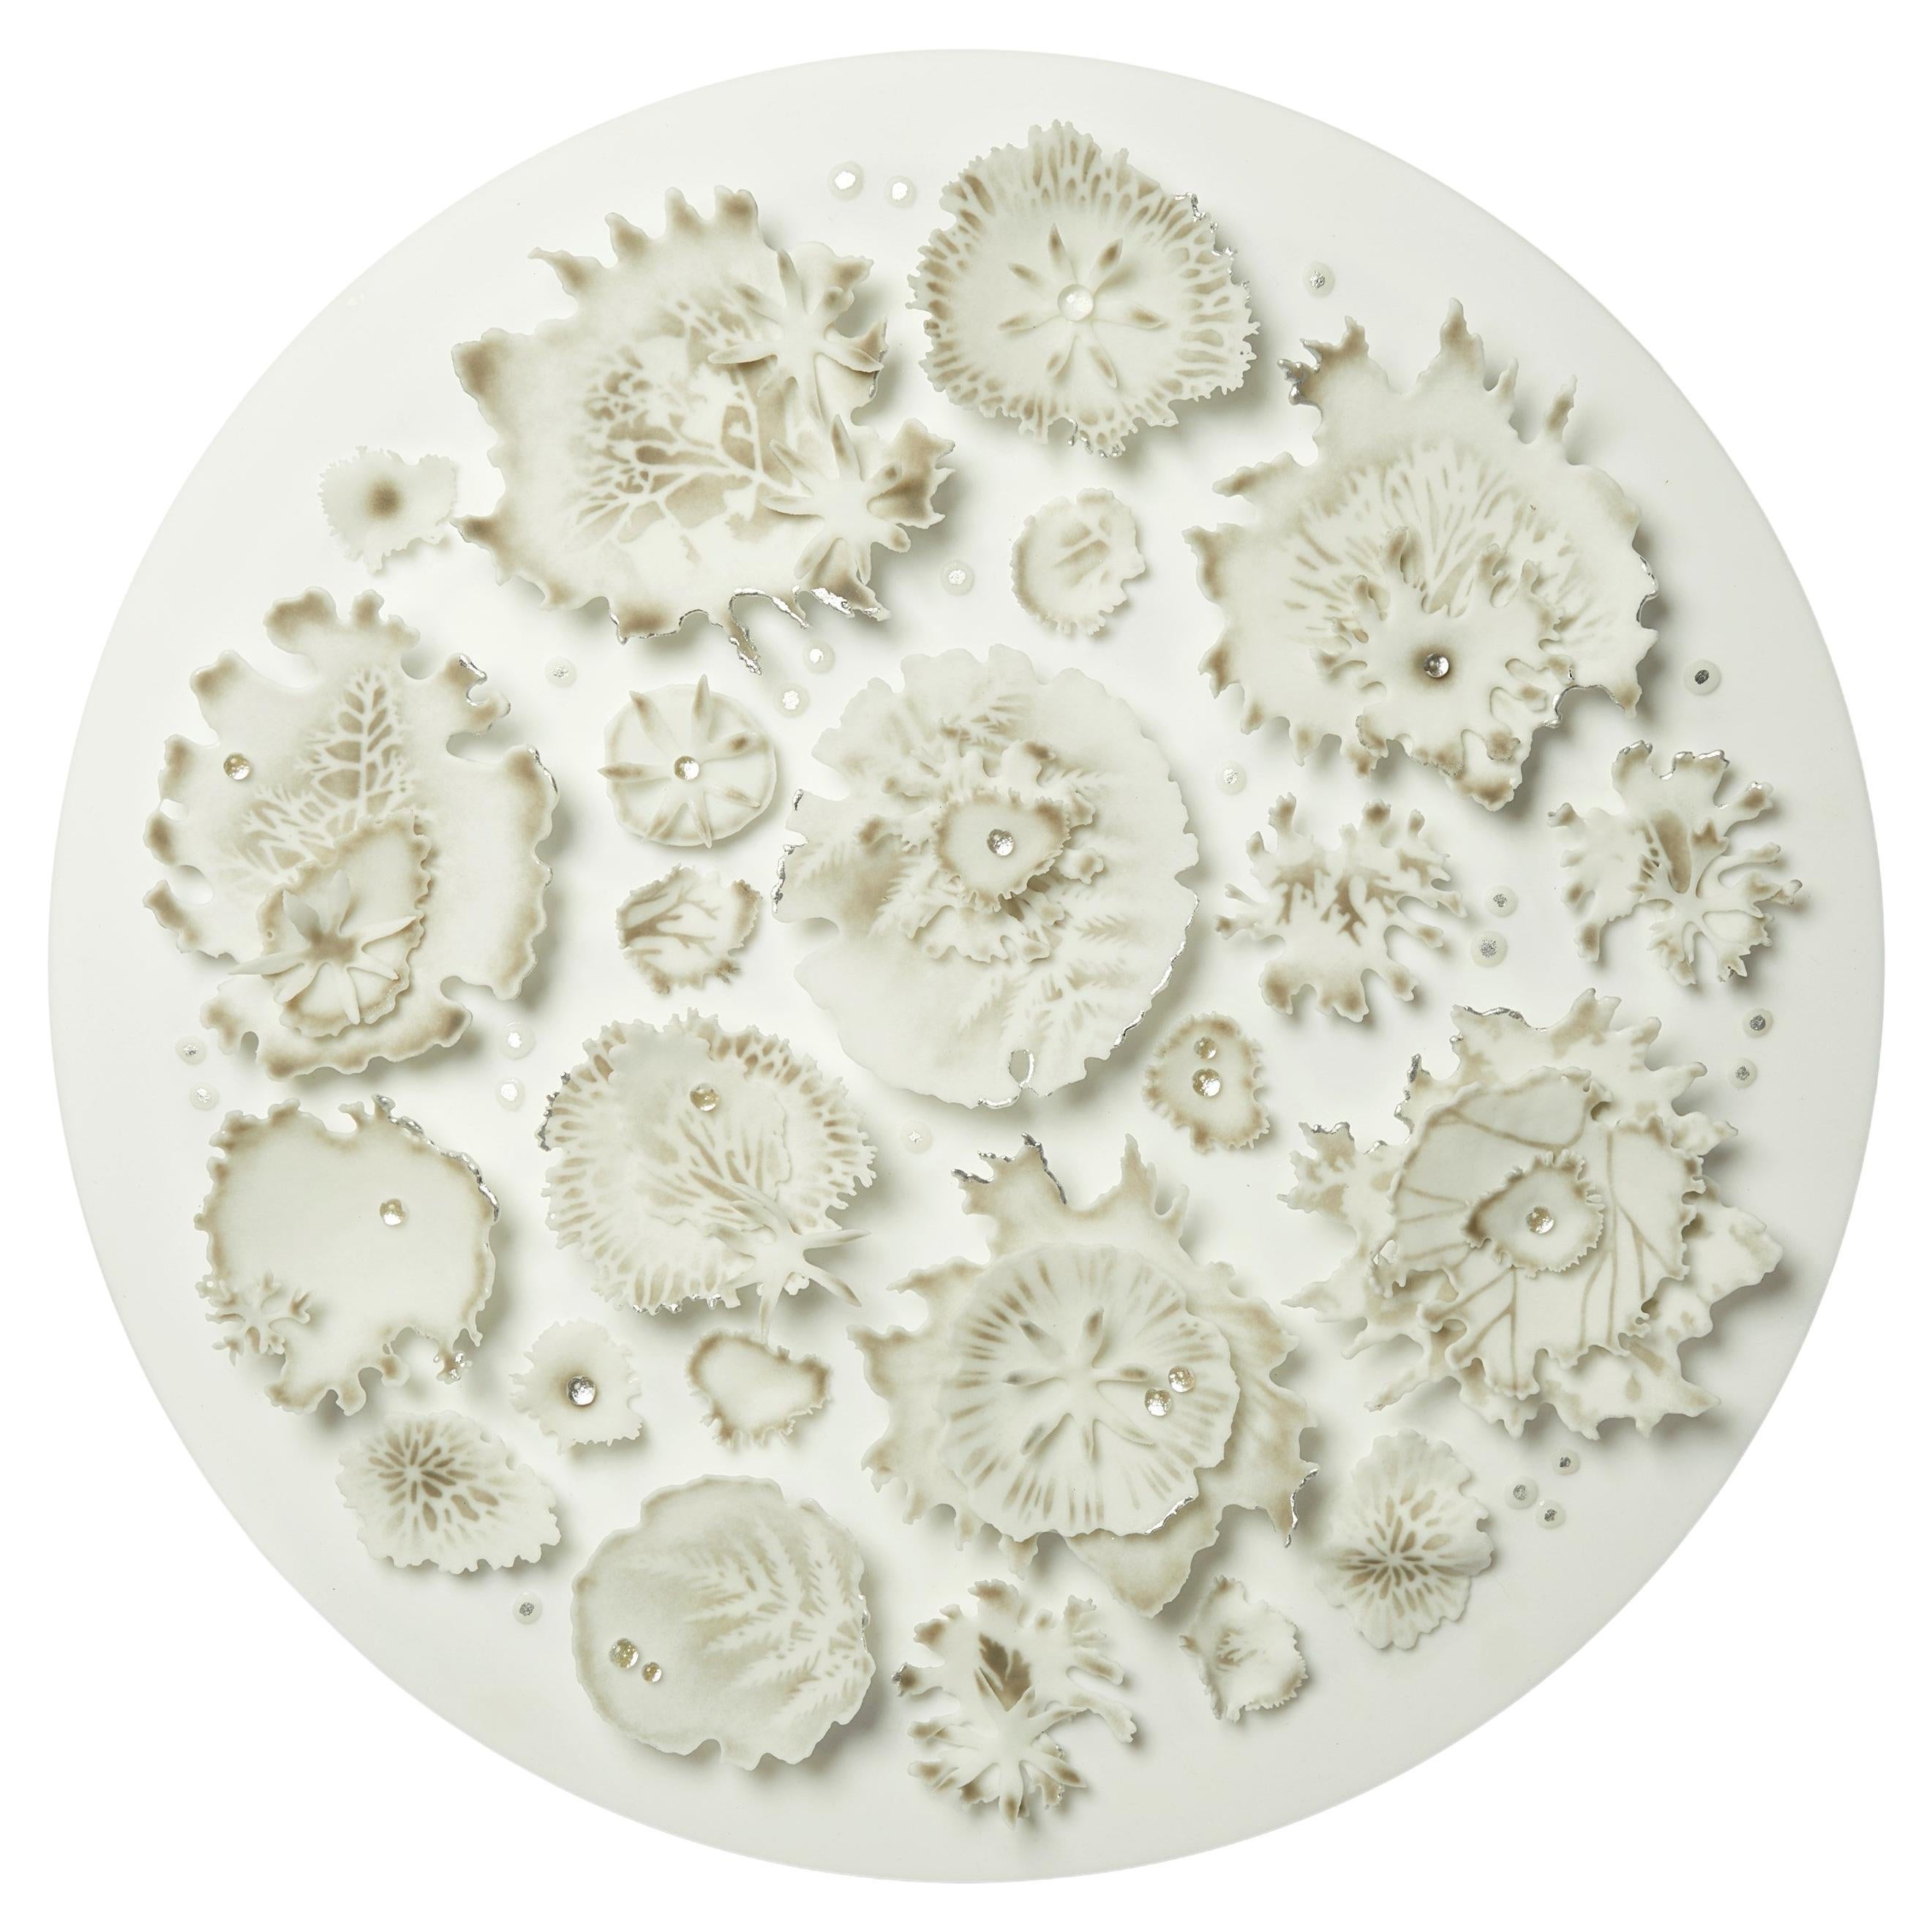 Dew, white round glass artwork with silver & bronze details by Verity Pulford